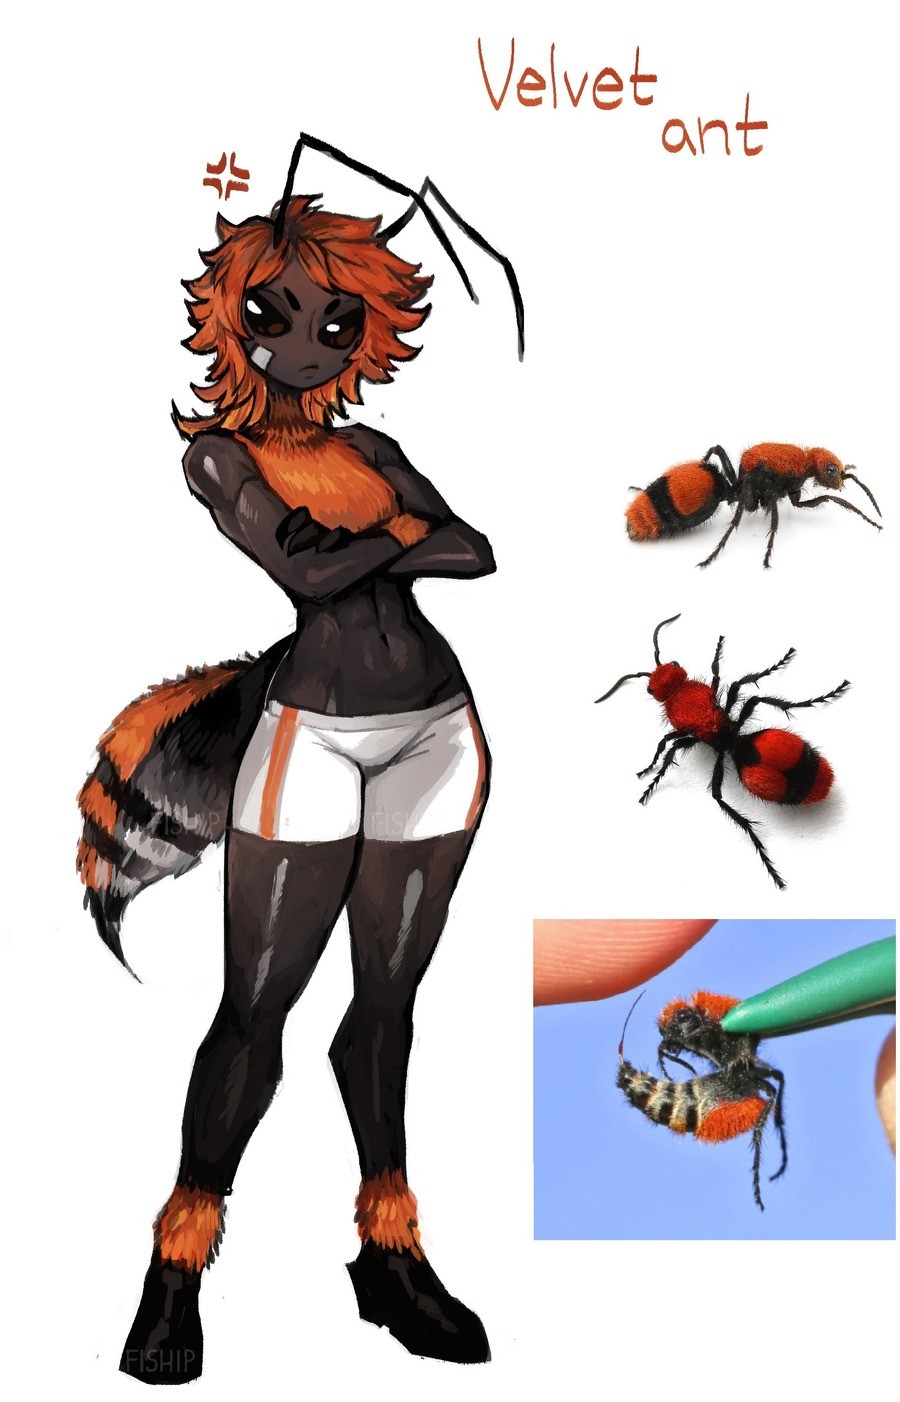 Velvet Ant and Tarantula Hawk. join list: KlictiChasers (160 subs)Mention History.. 2 prime examples of &quot;LEAVE IT THE ALONE&quot;.